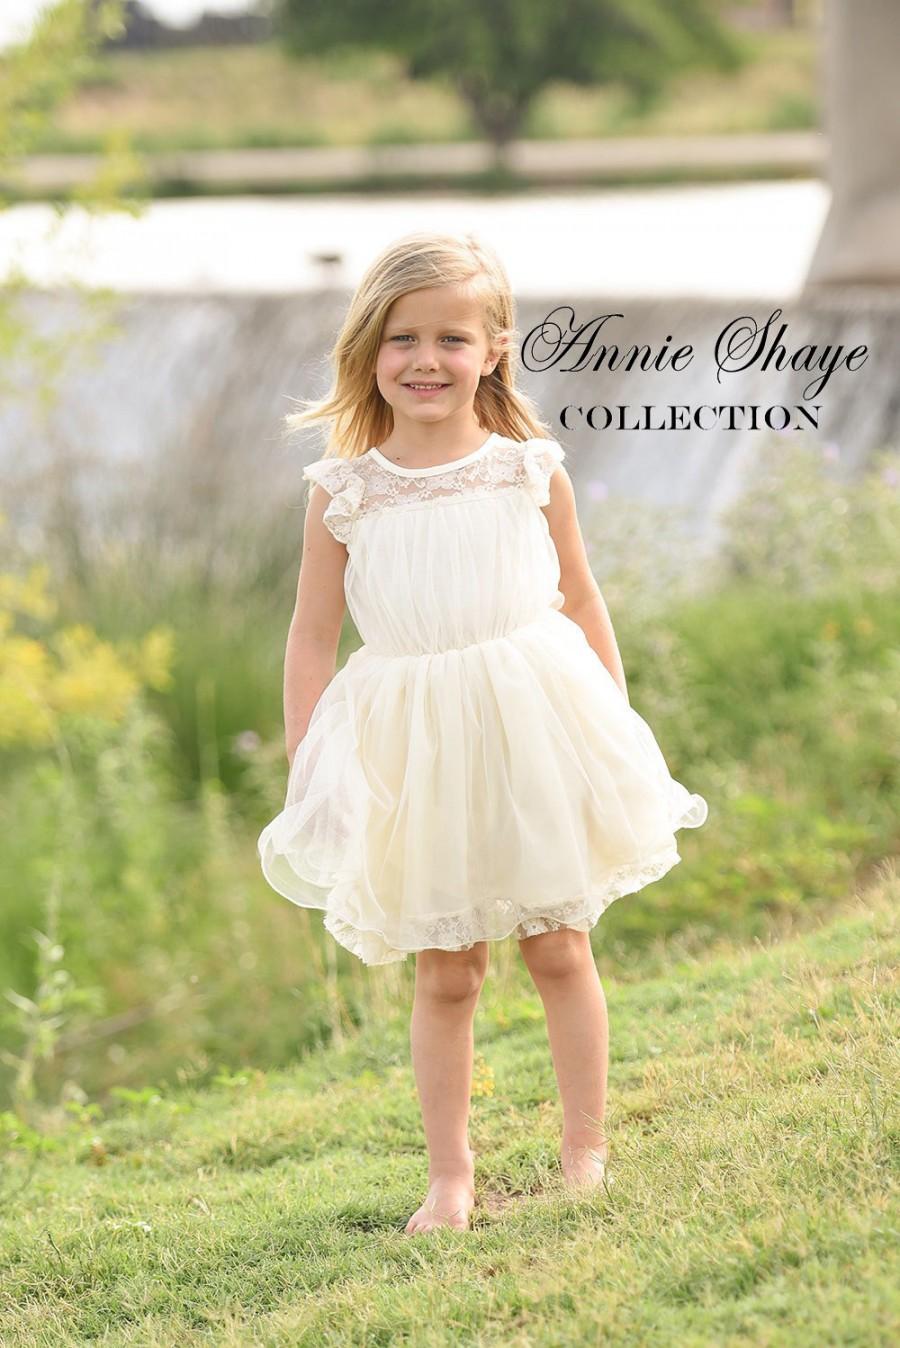 Hochzeit - Olivia Dress by Annie Shaye - flower girl dress ivory, lace toddler dress made for girls ages 9-12M,1t,2t,3t,4t,5,6,7,8,9,10,11,12,13,14